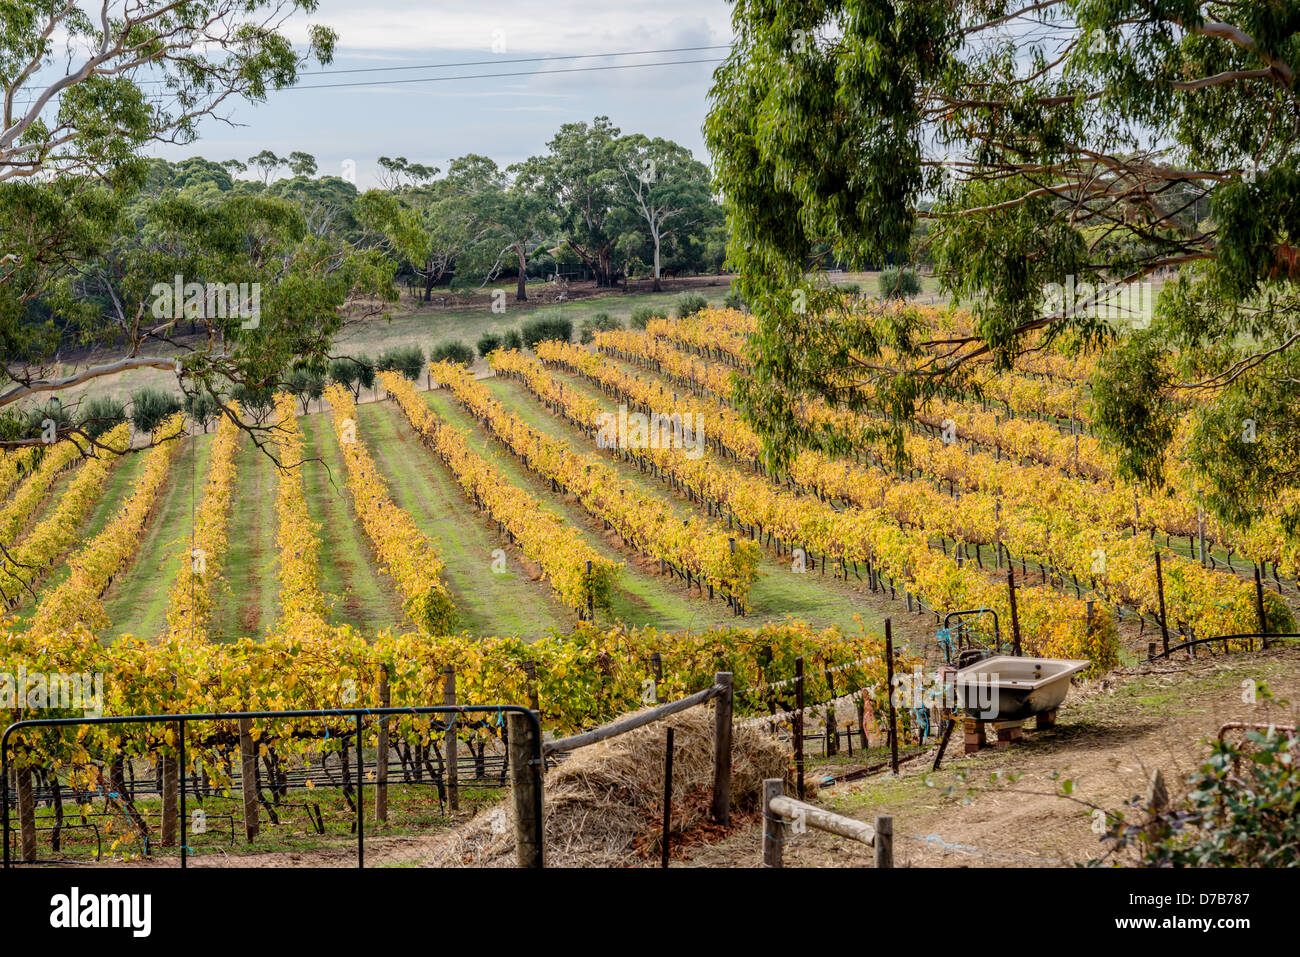 A vineyard under brilliant blue skies bathed in sunlight. The rows of vines converge in the distance. Stock Photo